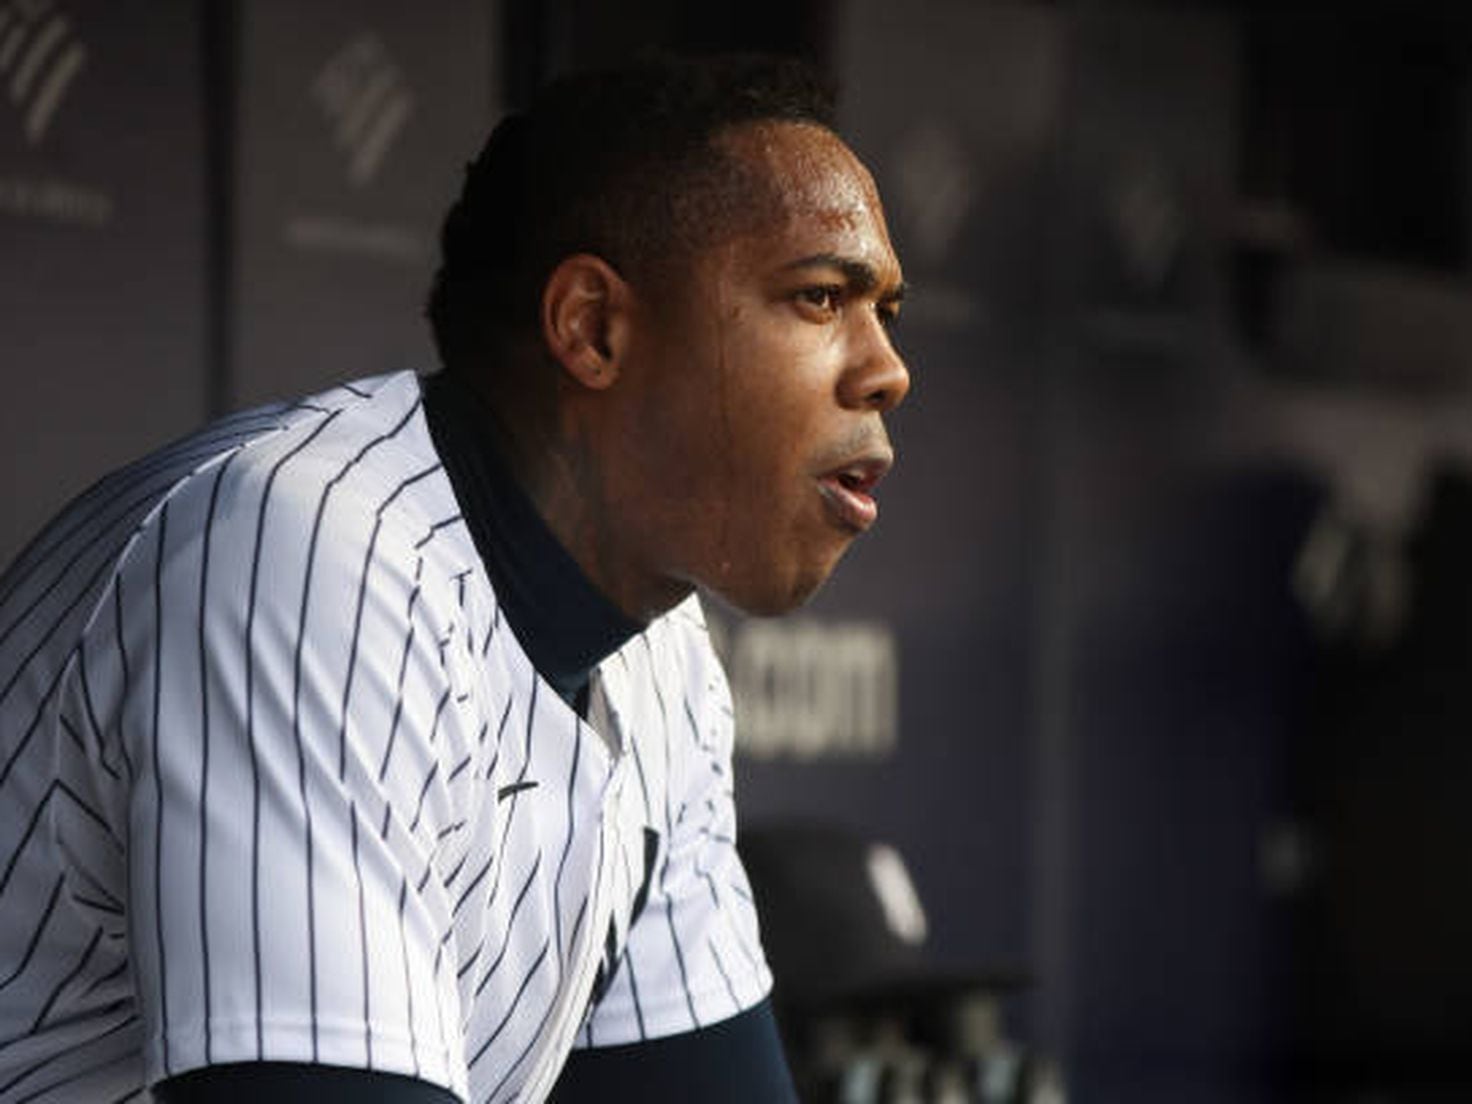 Yankees' 9 players on hot seat for playoff roster: Aroldis Chapman